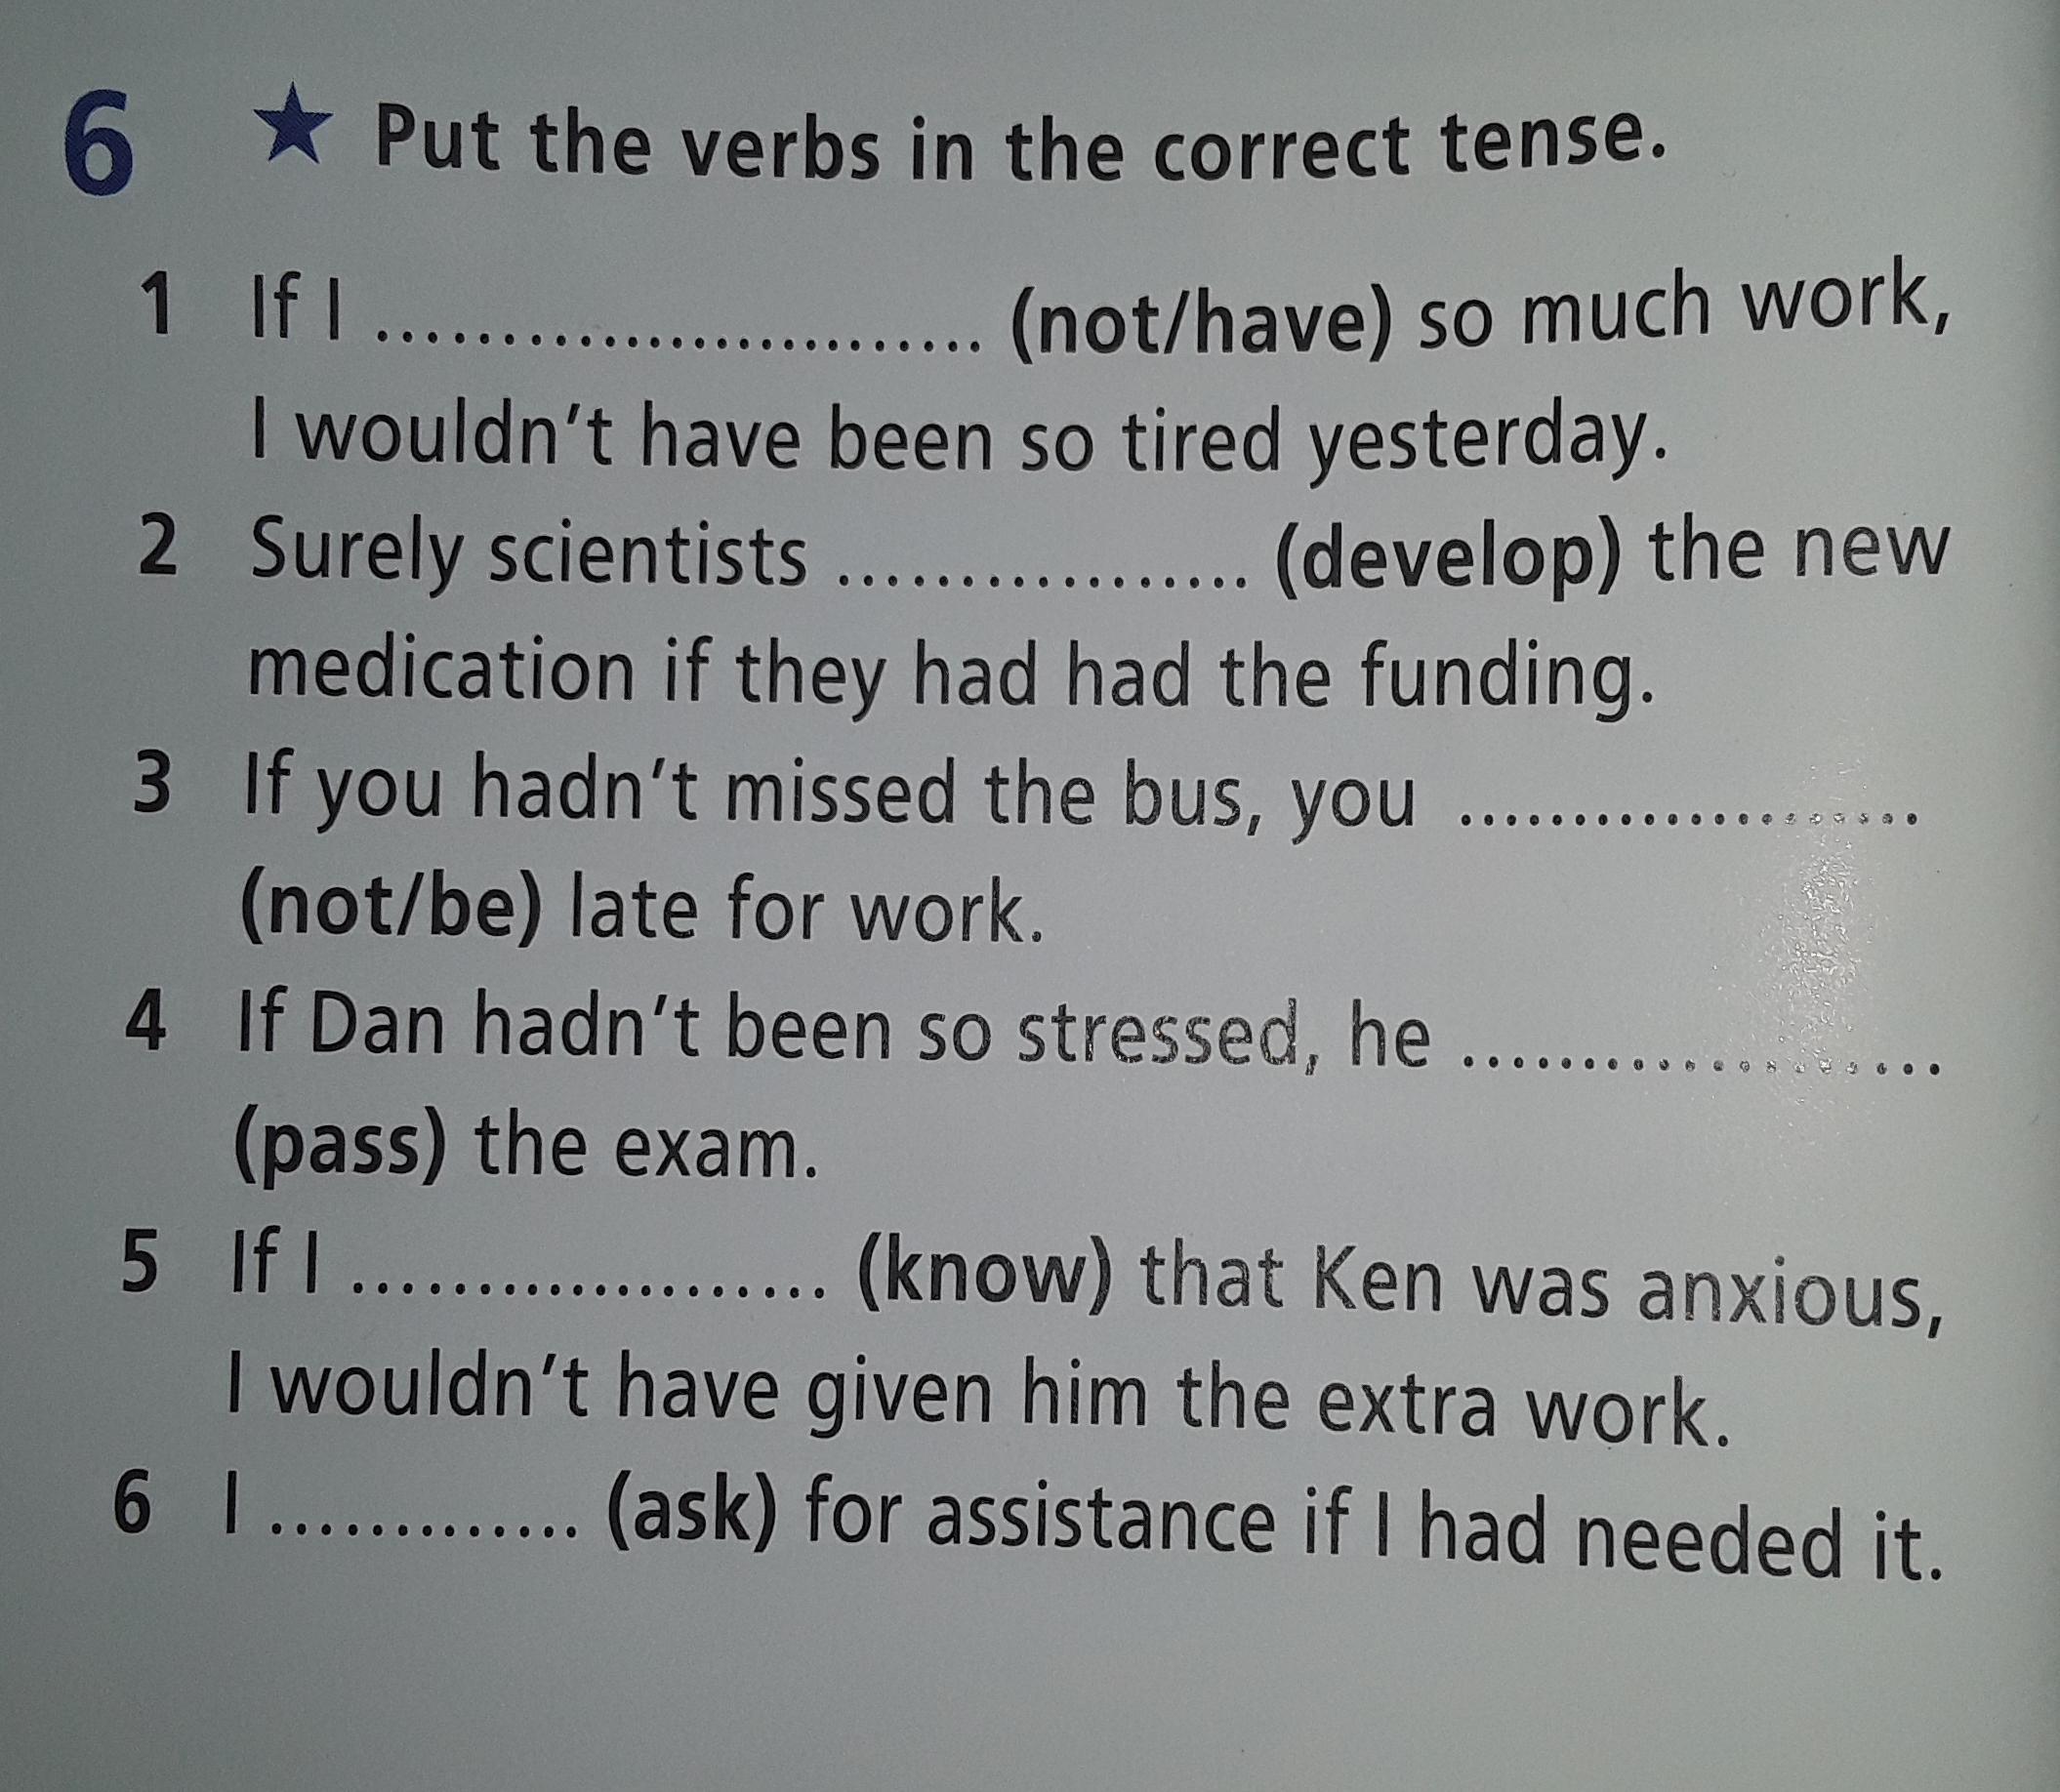 Put the verbs in the correct Tense. Put the verbs in the correct Tense 8 класс. Use the verbs to complete the Letter put them in the correct Tense 5 класс. Correct Tense.